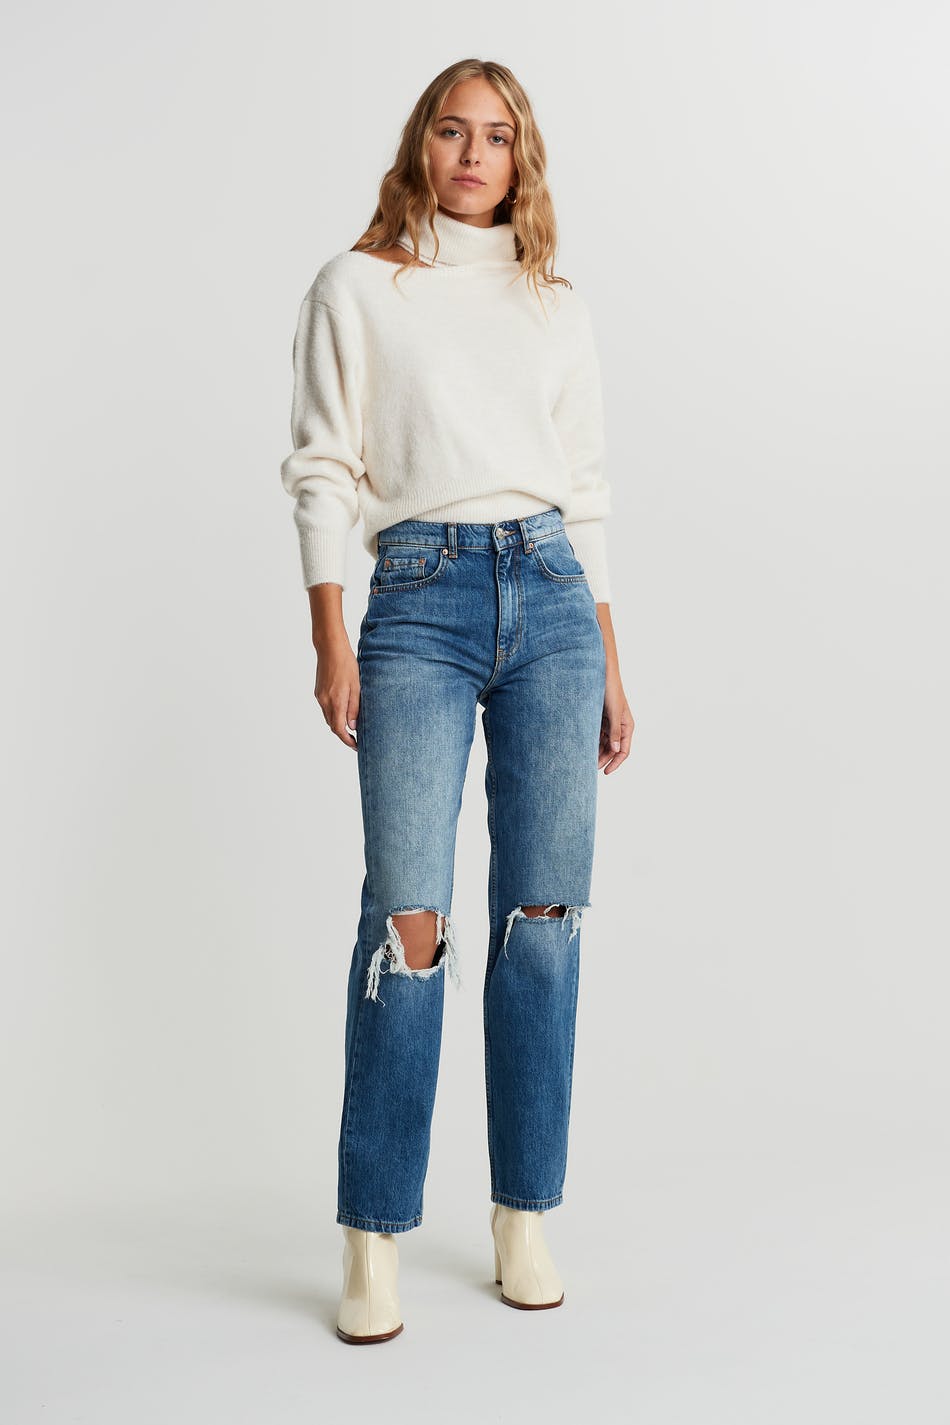 ripped jeans gina tricot